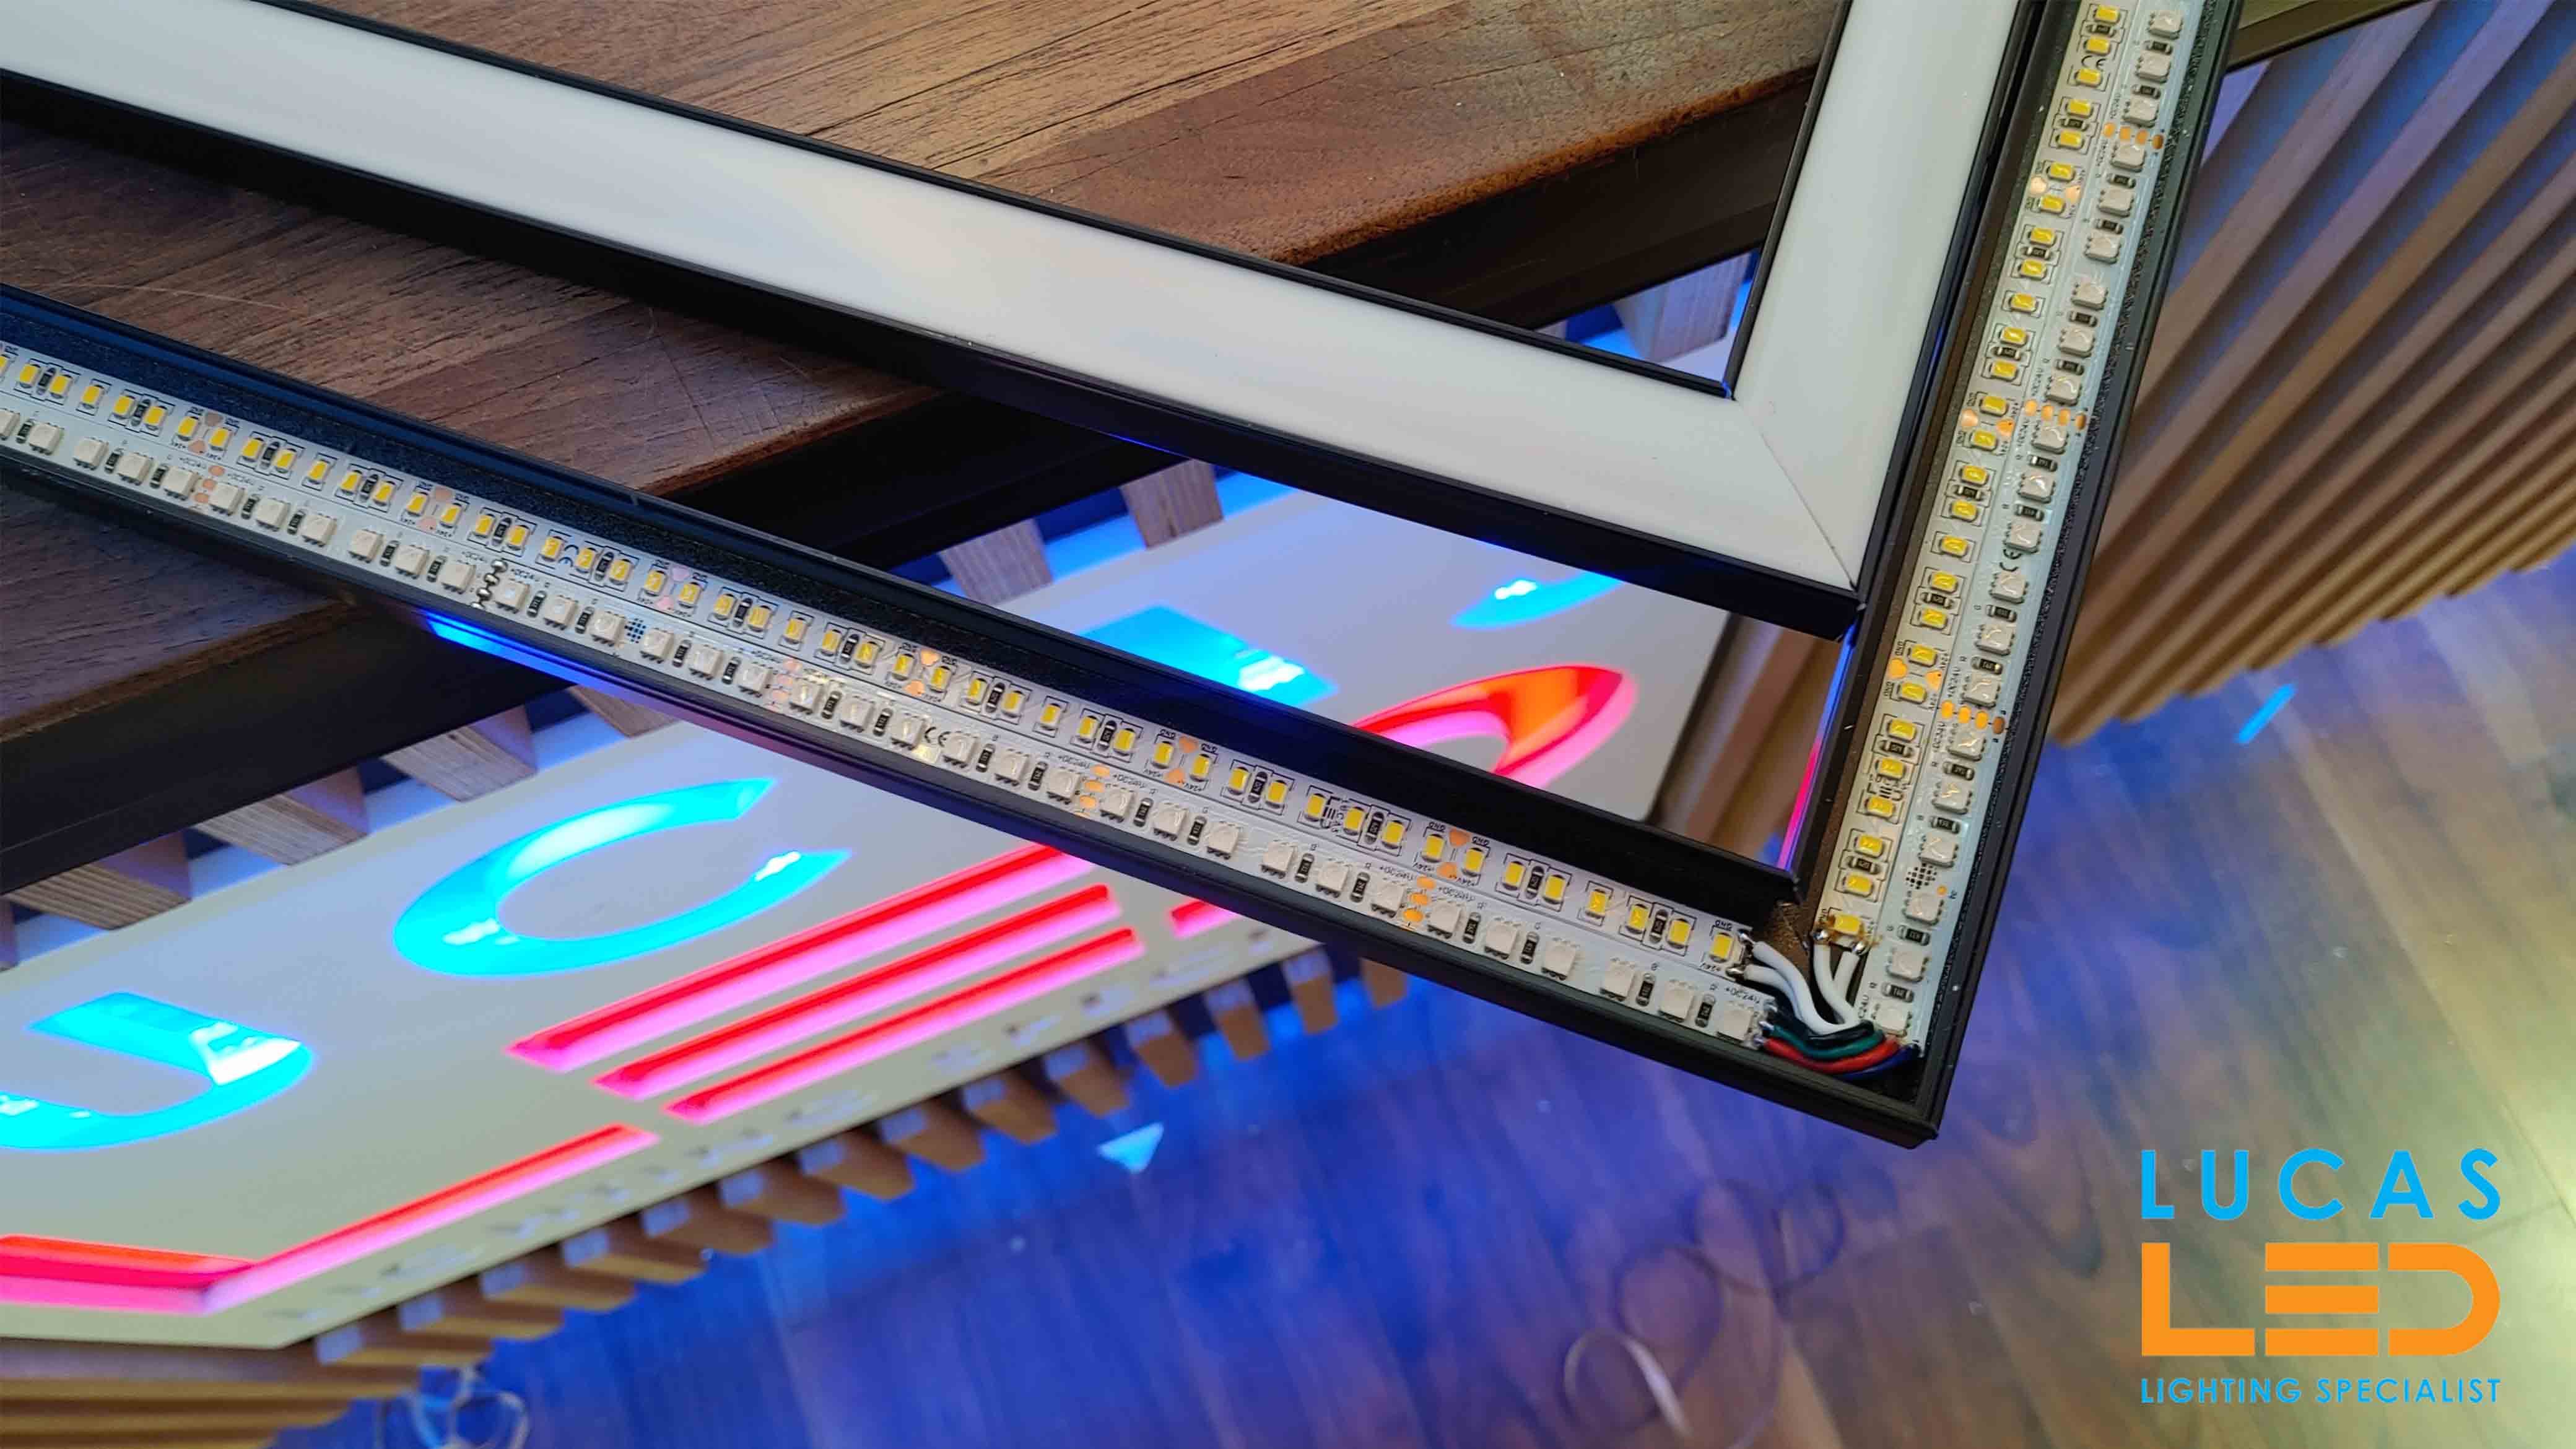 How to use LED light strips with remote? - Blog